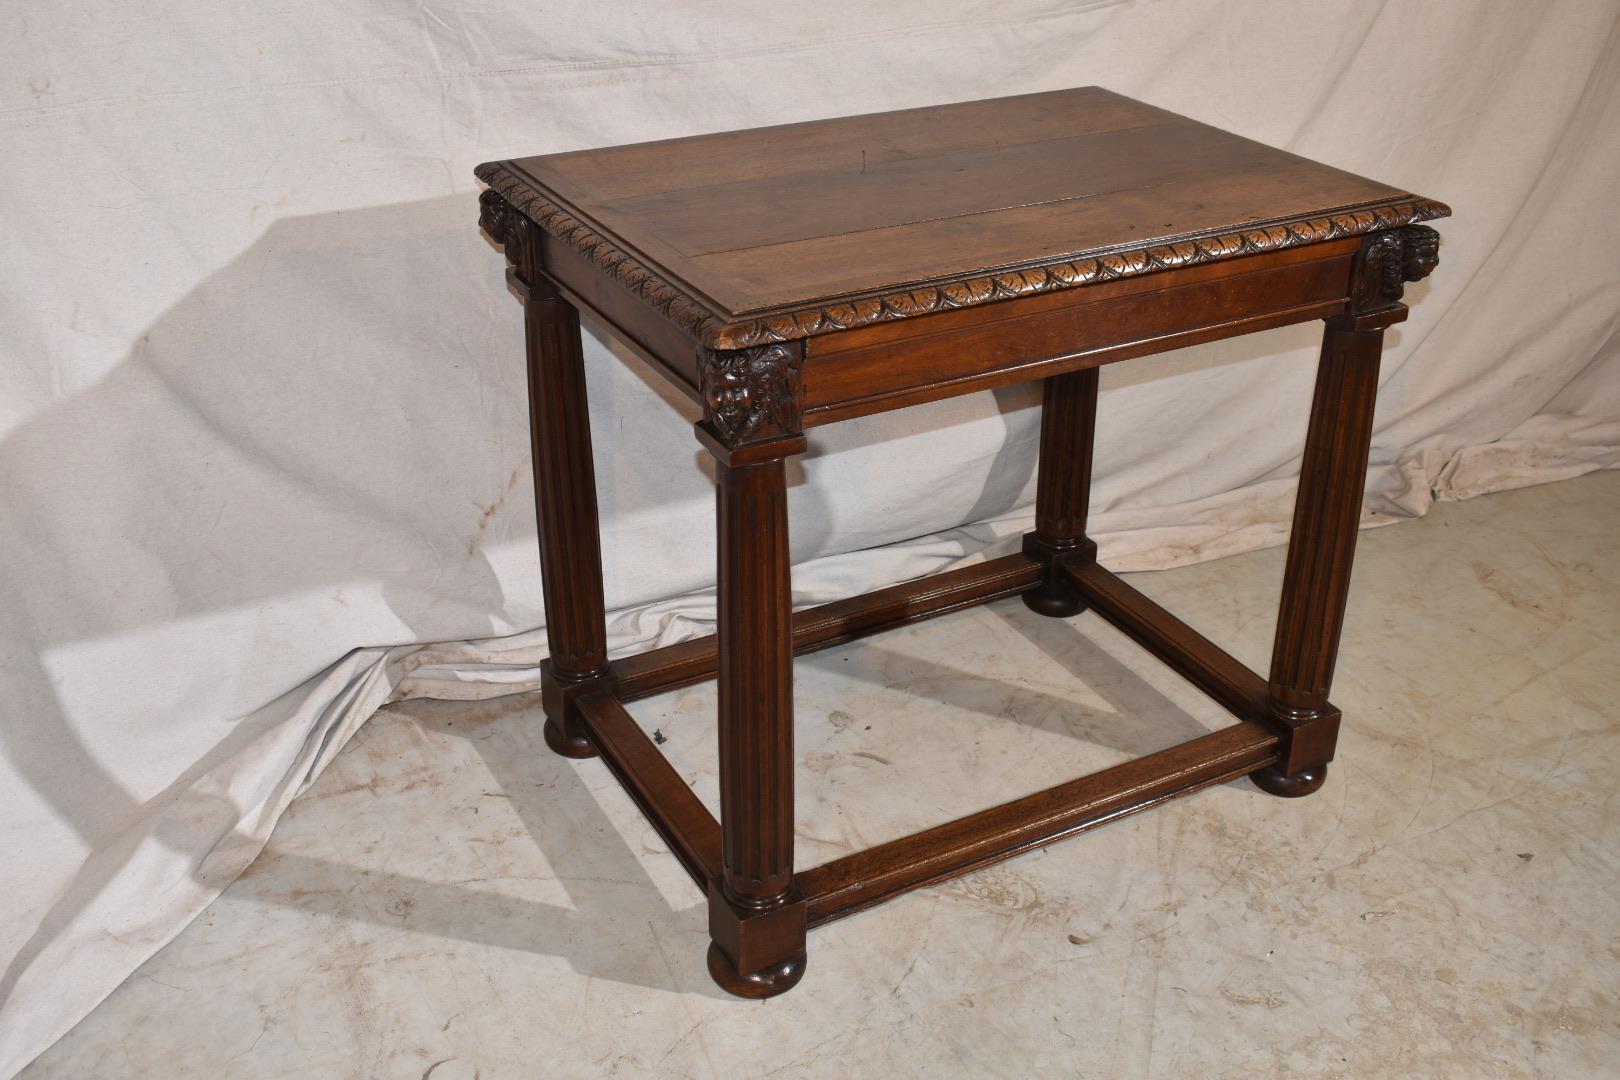 A beautiful solid walnut Italian center table from the late 18th century. The paneled walnut top is resting on a carved apron with fluted column legs. All ending on a pegged box stretcher with bun feet. The table features a dovetailed drawer to the